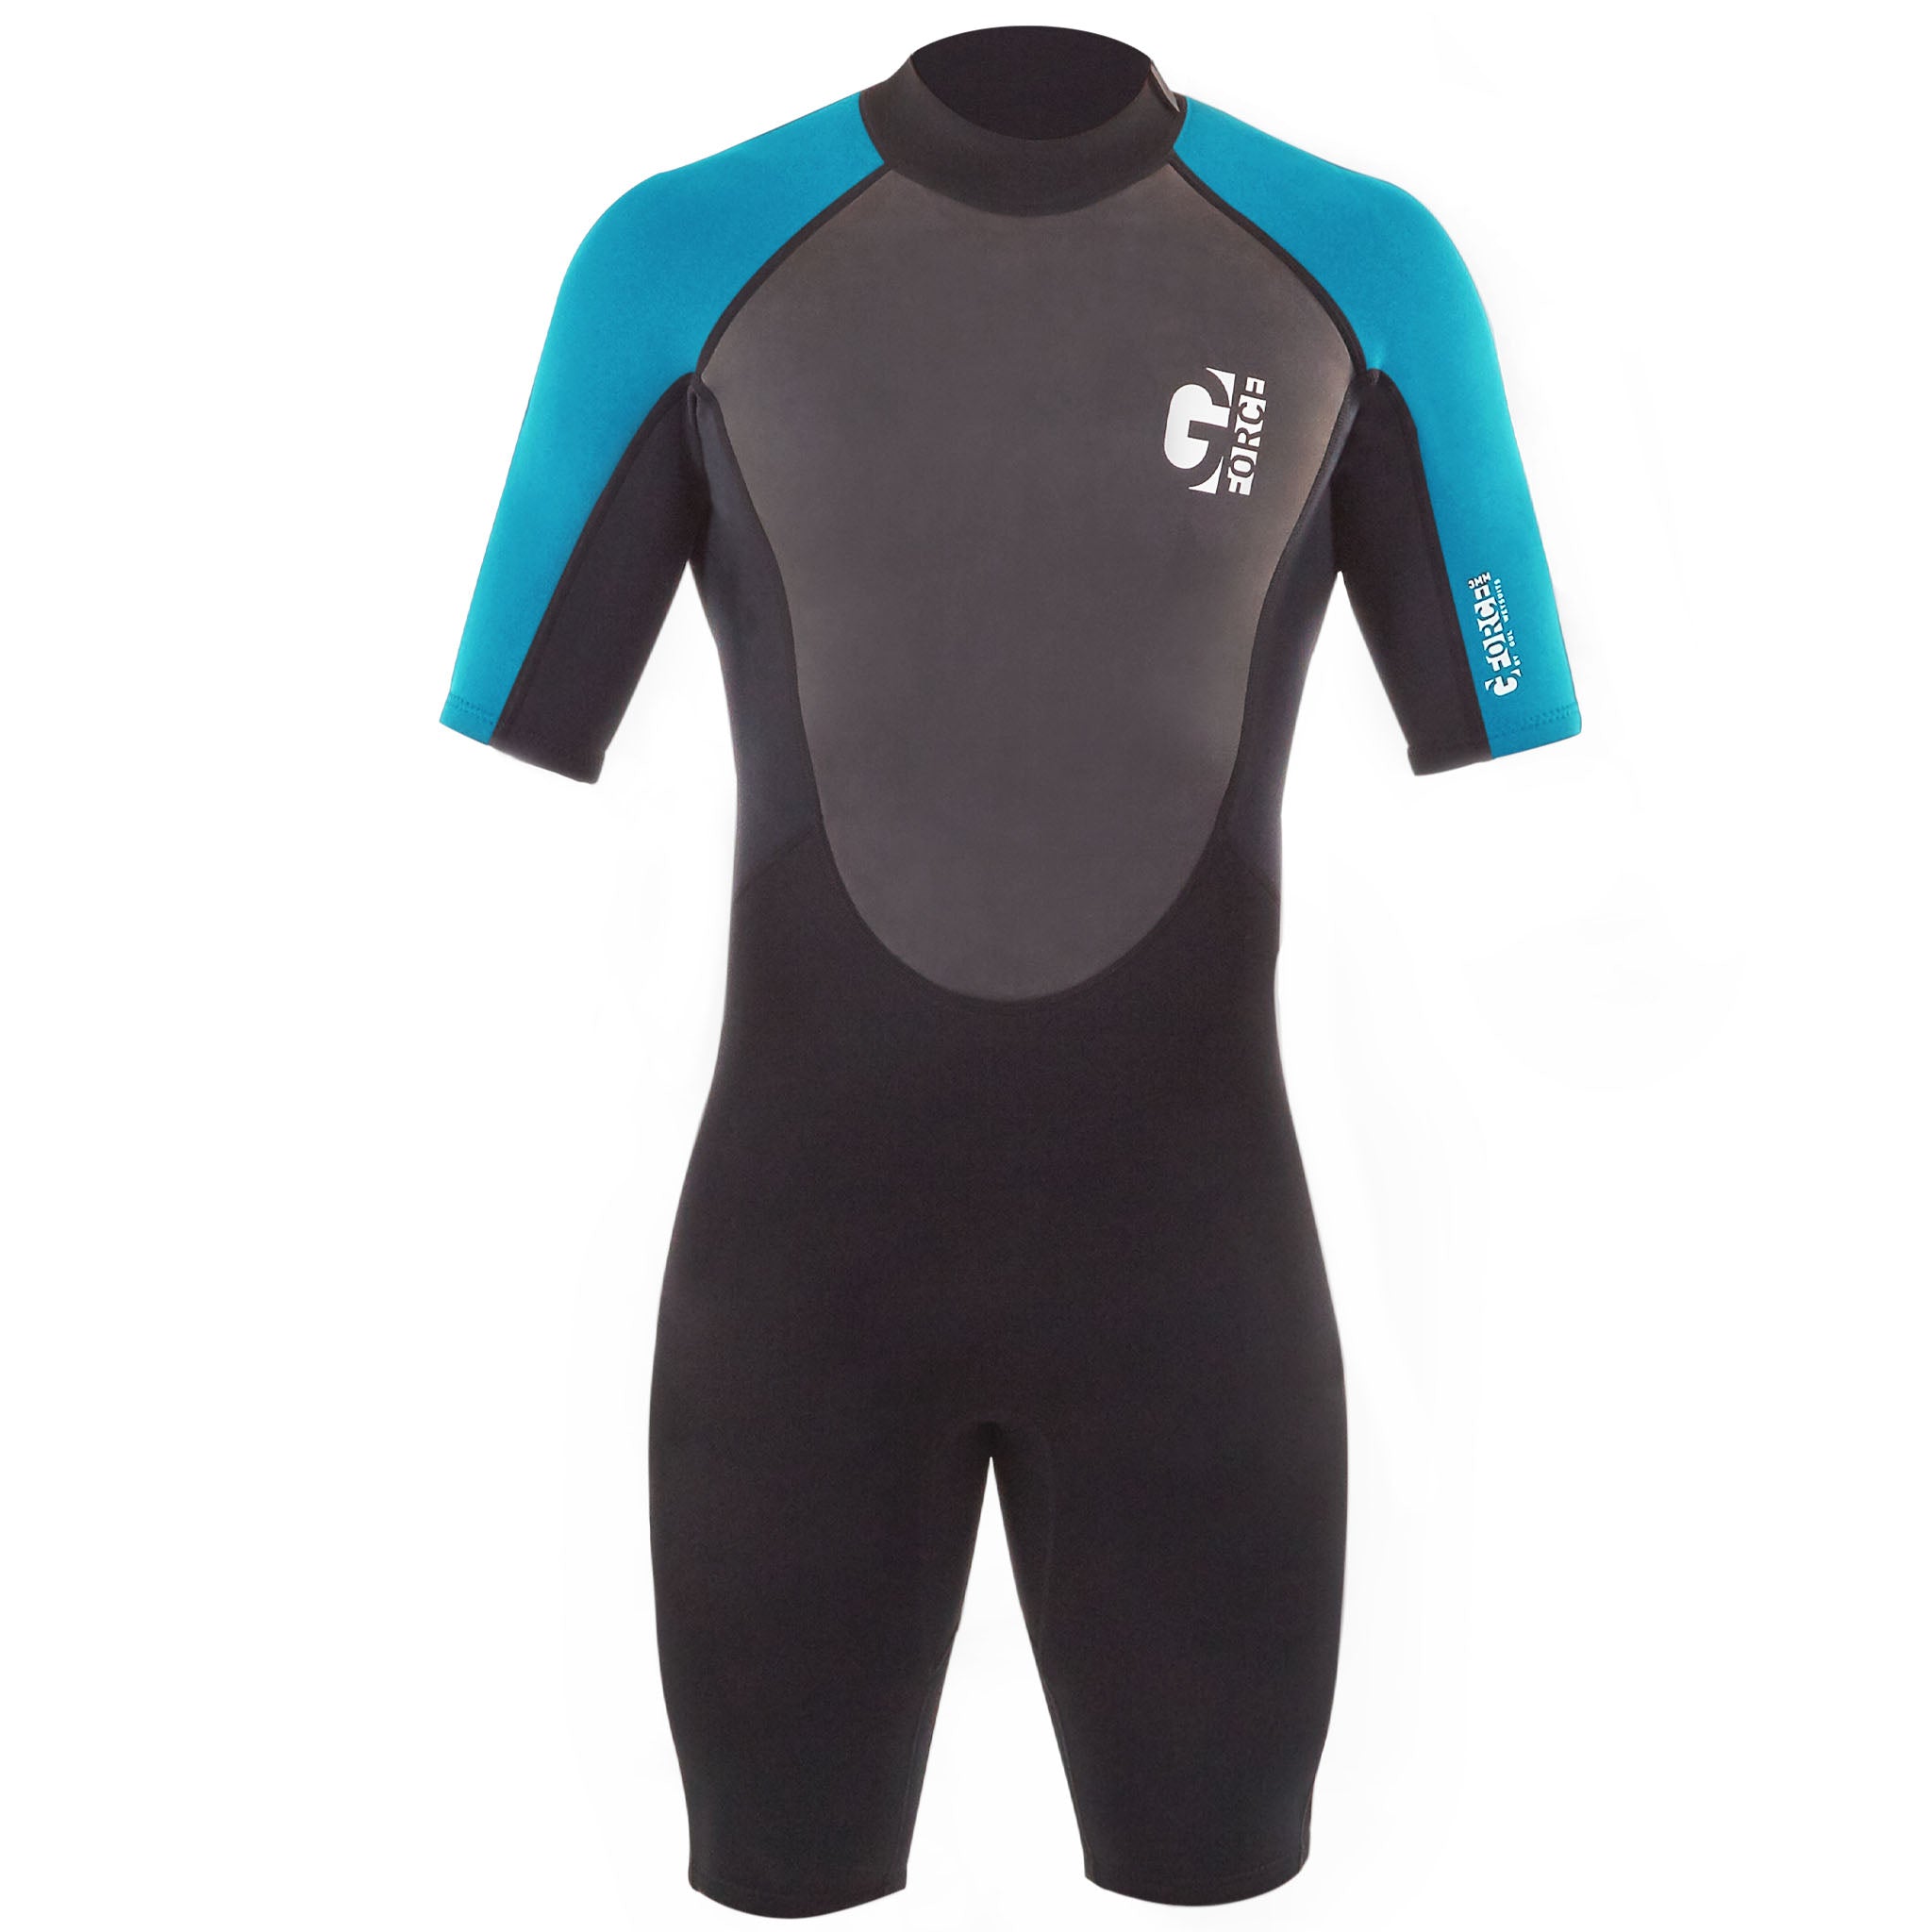 Gul Kids G-Force 3/2mm Shorty Wetsuit